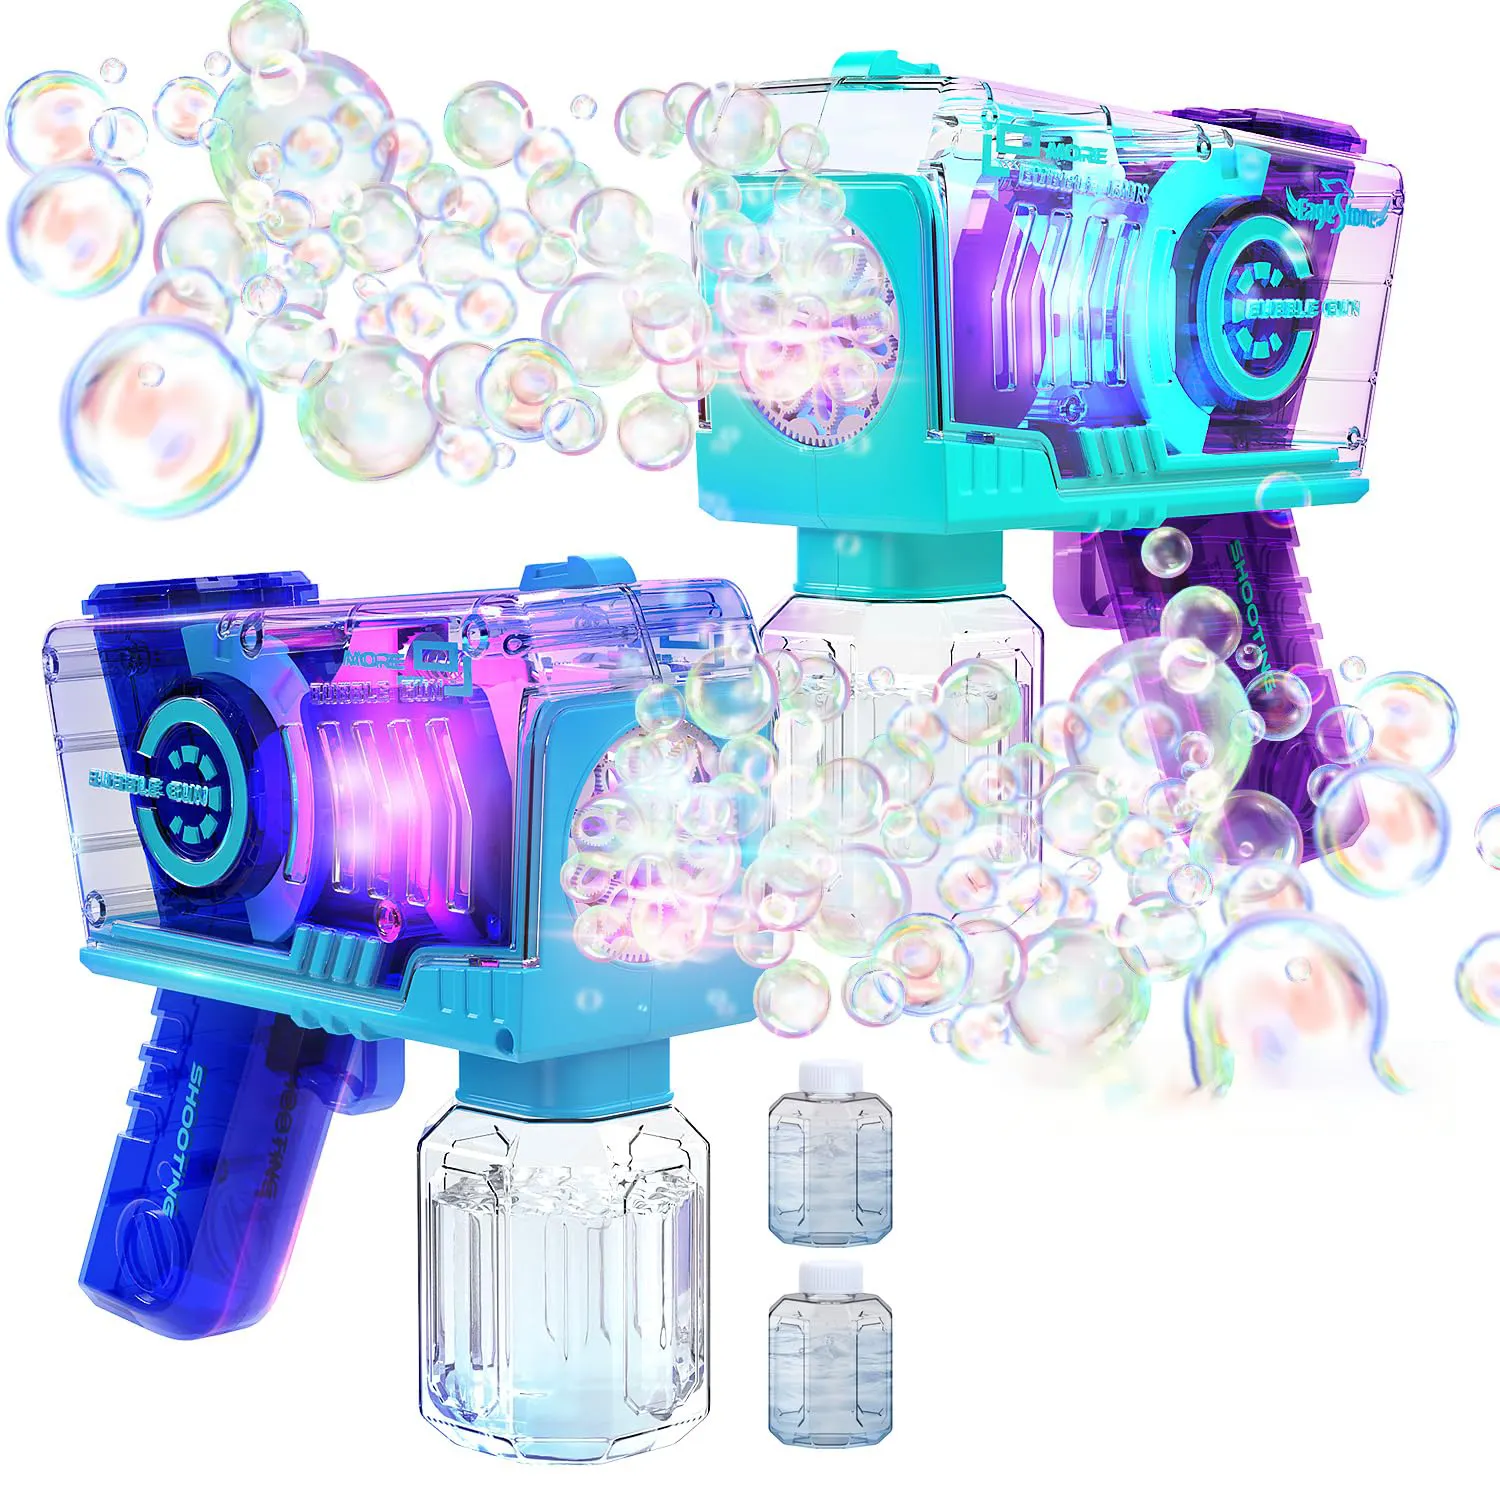 Cool Light Up Transparency Bubble Gun Machine Toys For Kids Party Bubble Blower Maker Toy Summer Soap Water Toys